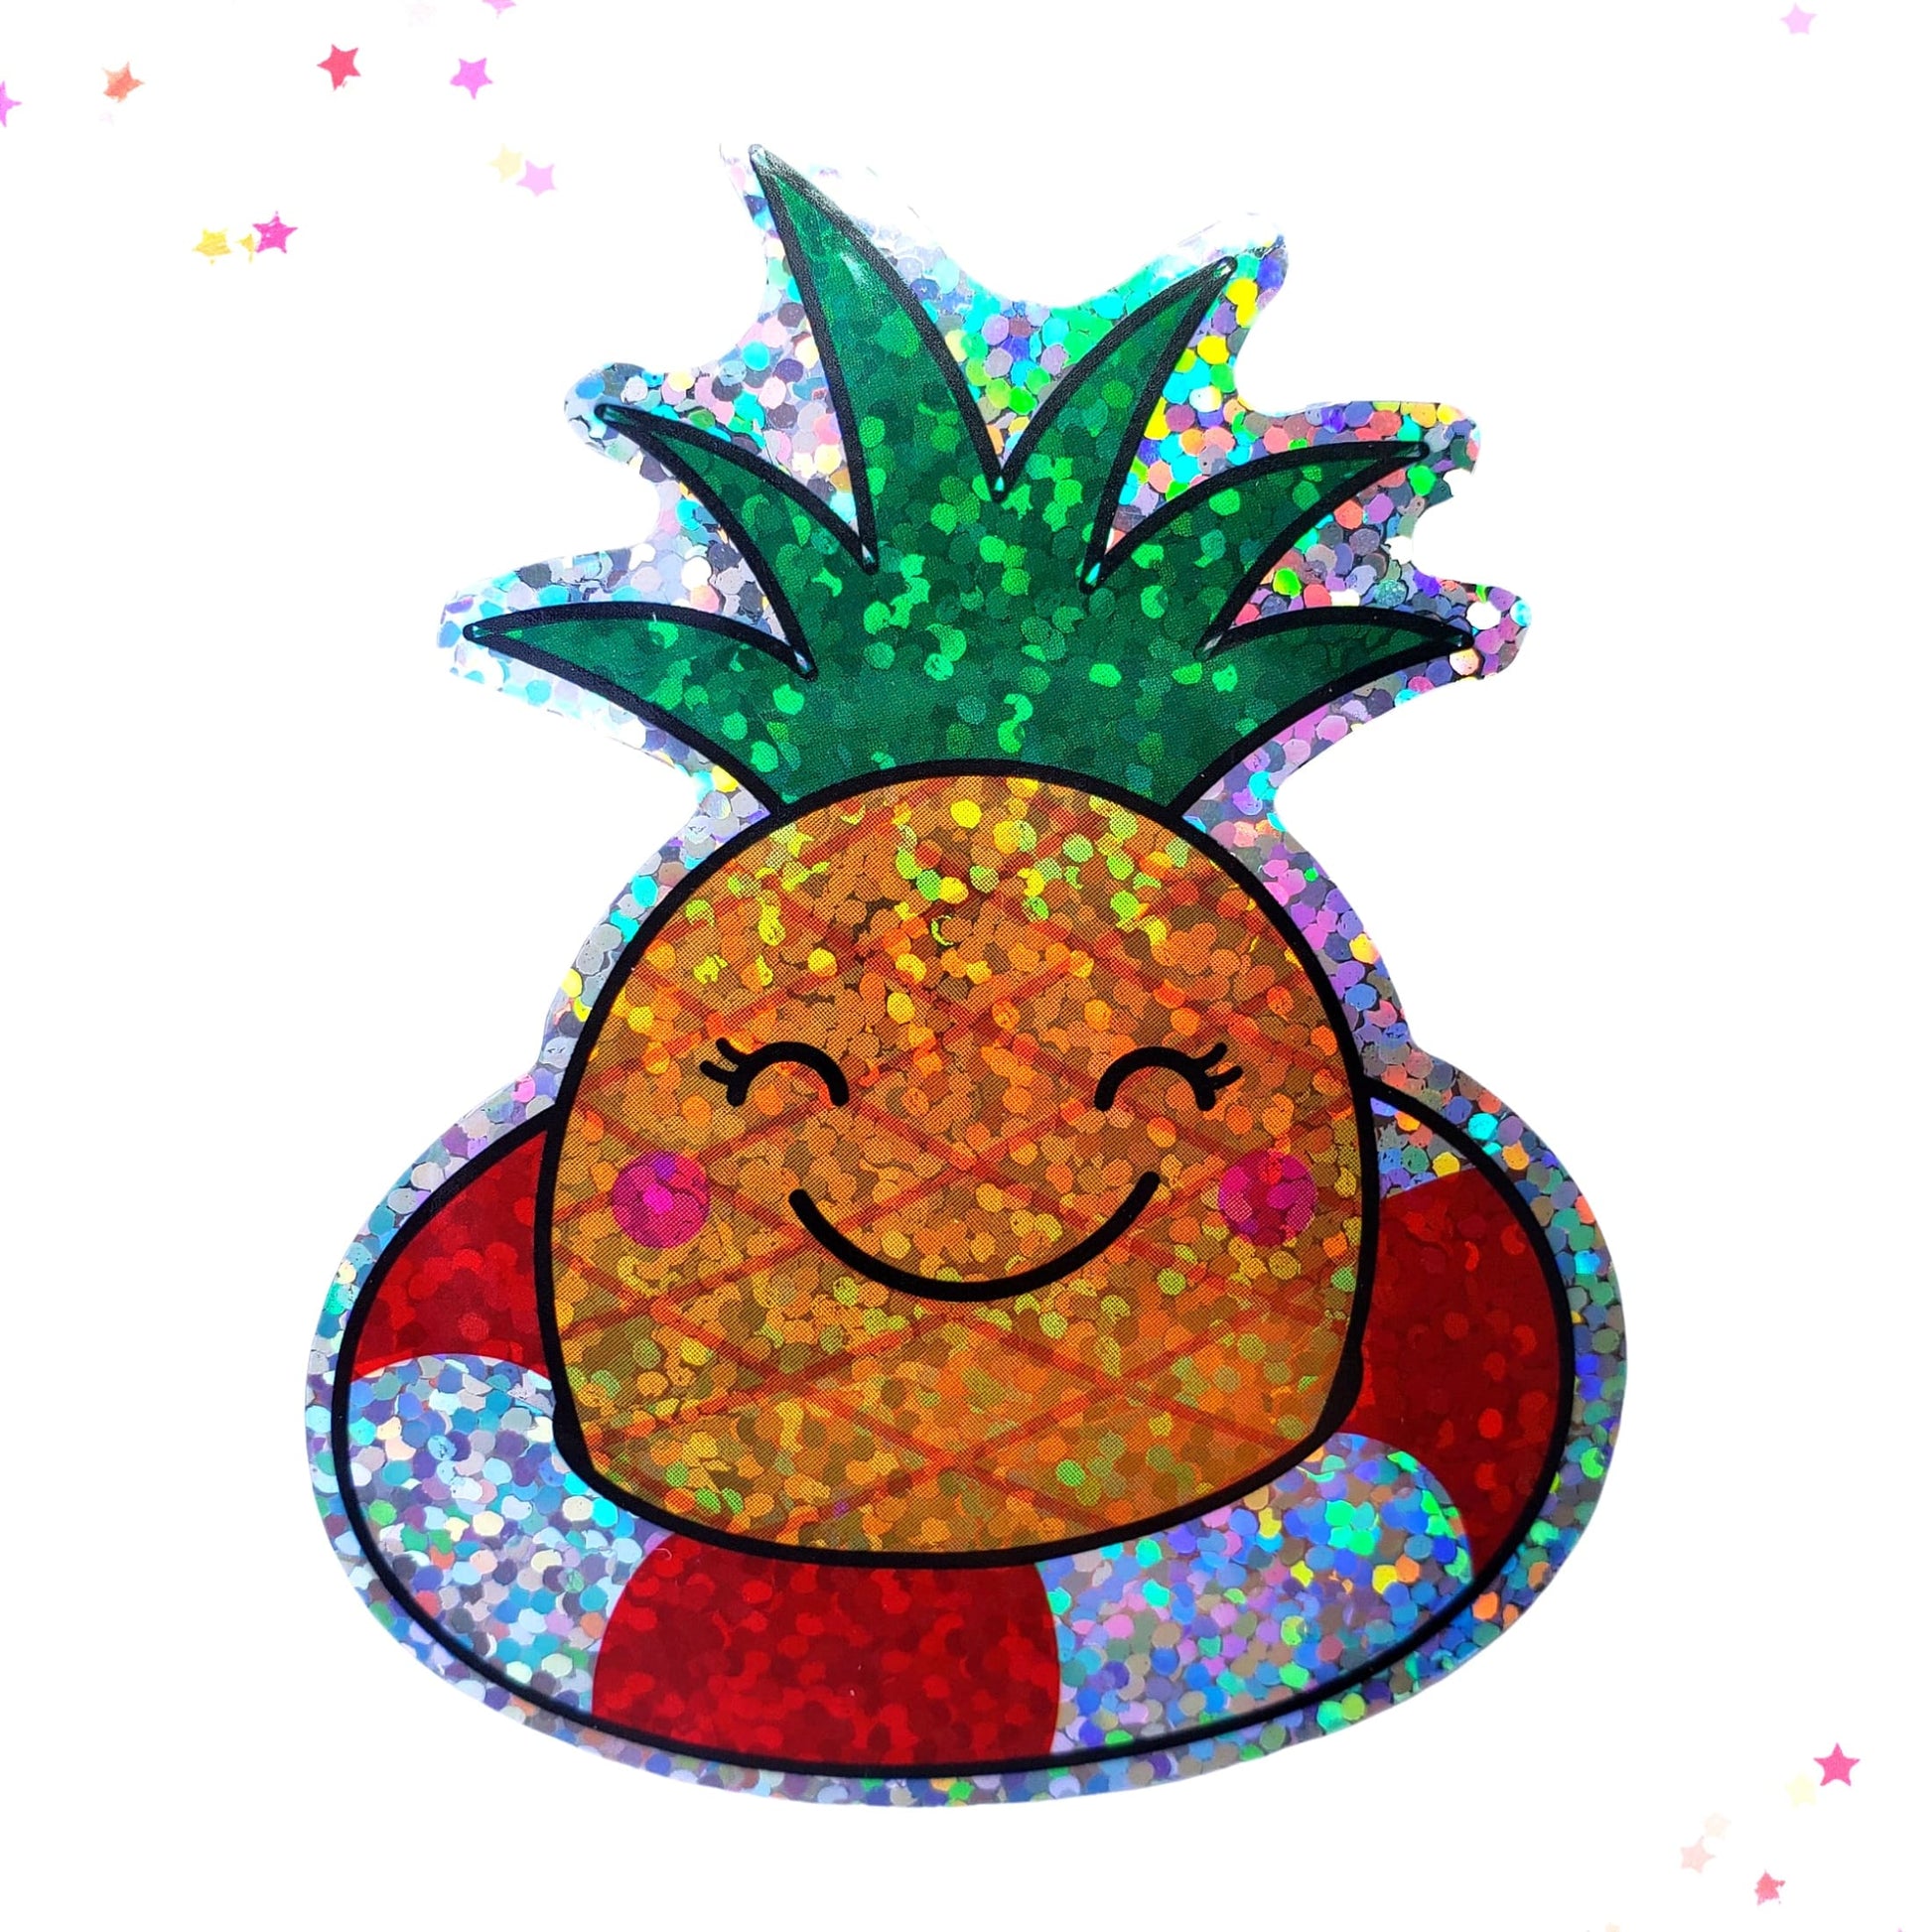 Premium Sticker - Sparkly Holographic Glitter Preserved Pineapple from Confetti Kitty, Only 2.00